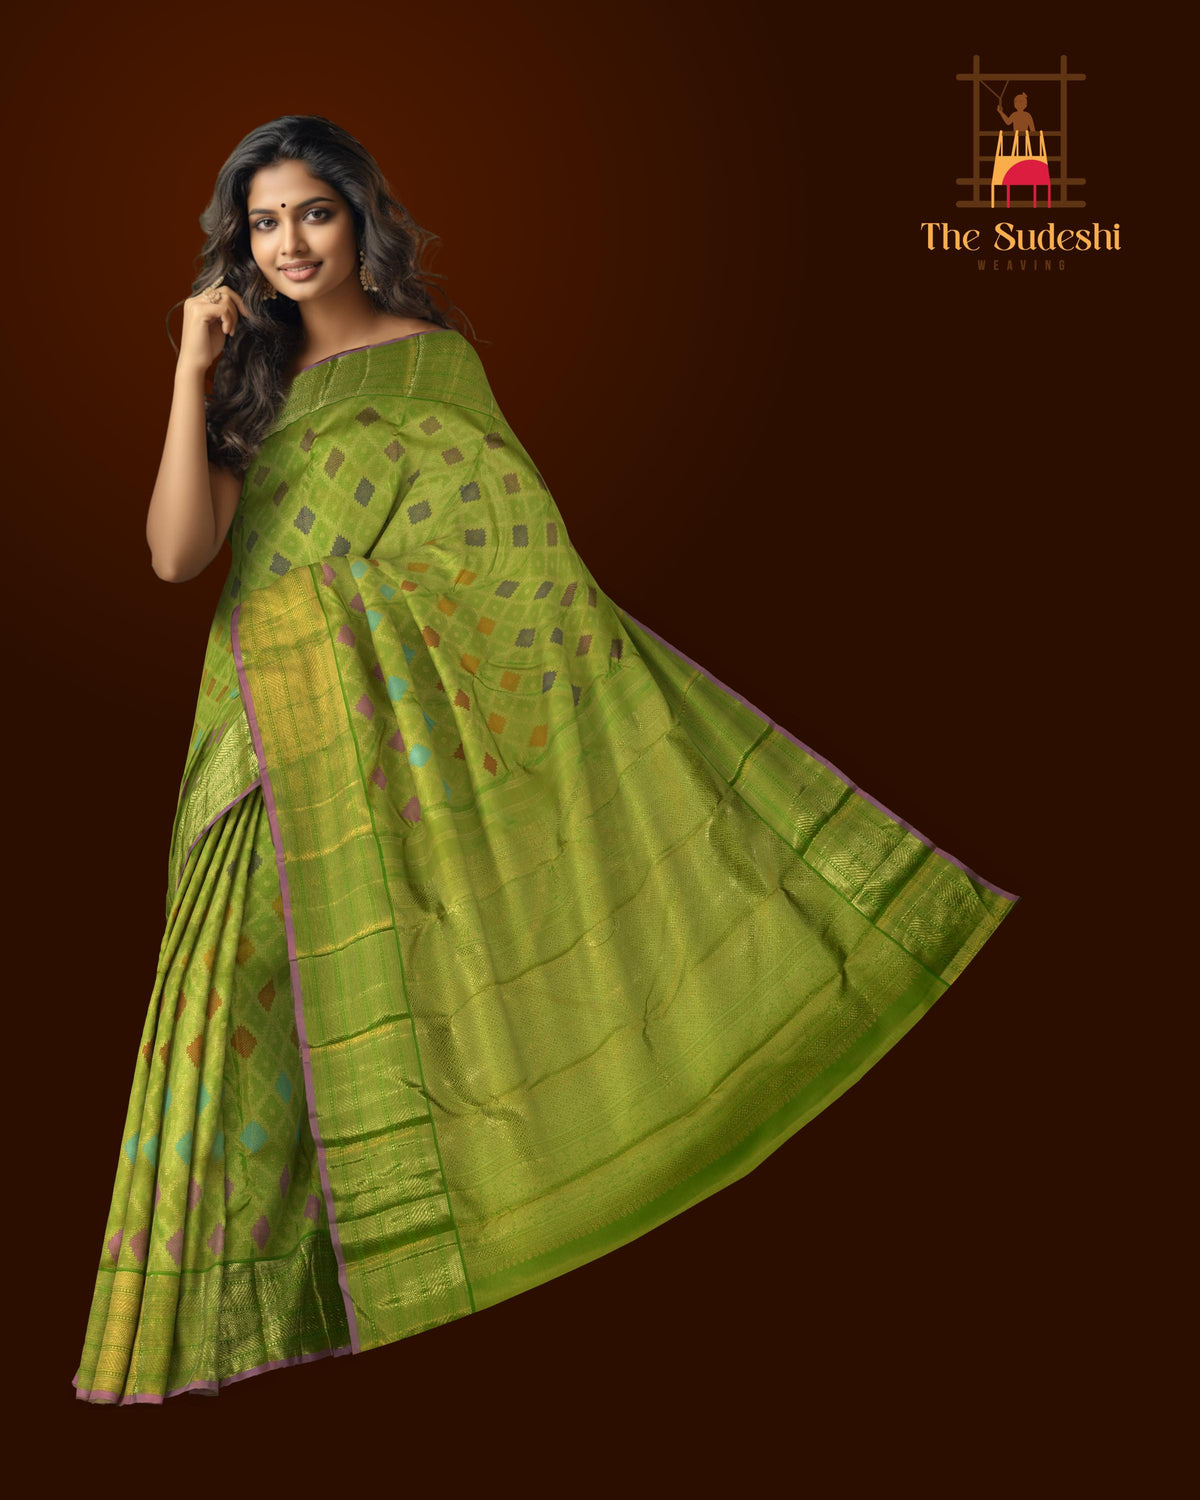 Lime green Kanchipuram Silk Saree with Tissue, Embossed, Meenakari, Diamond design with multicolour threadwork on the body with light green with lavender selvage contrast border and pallu featuring grand, floral intricately designed grand pallu